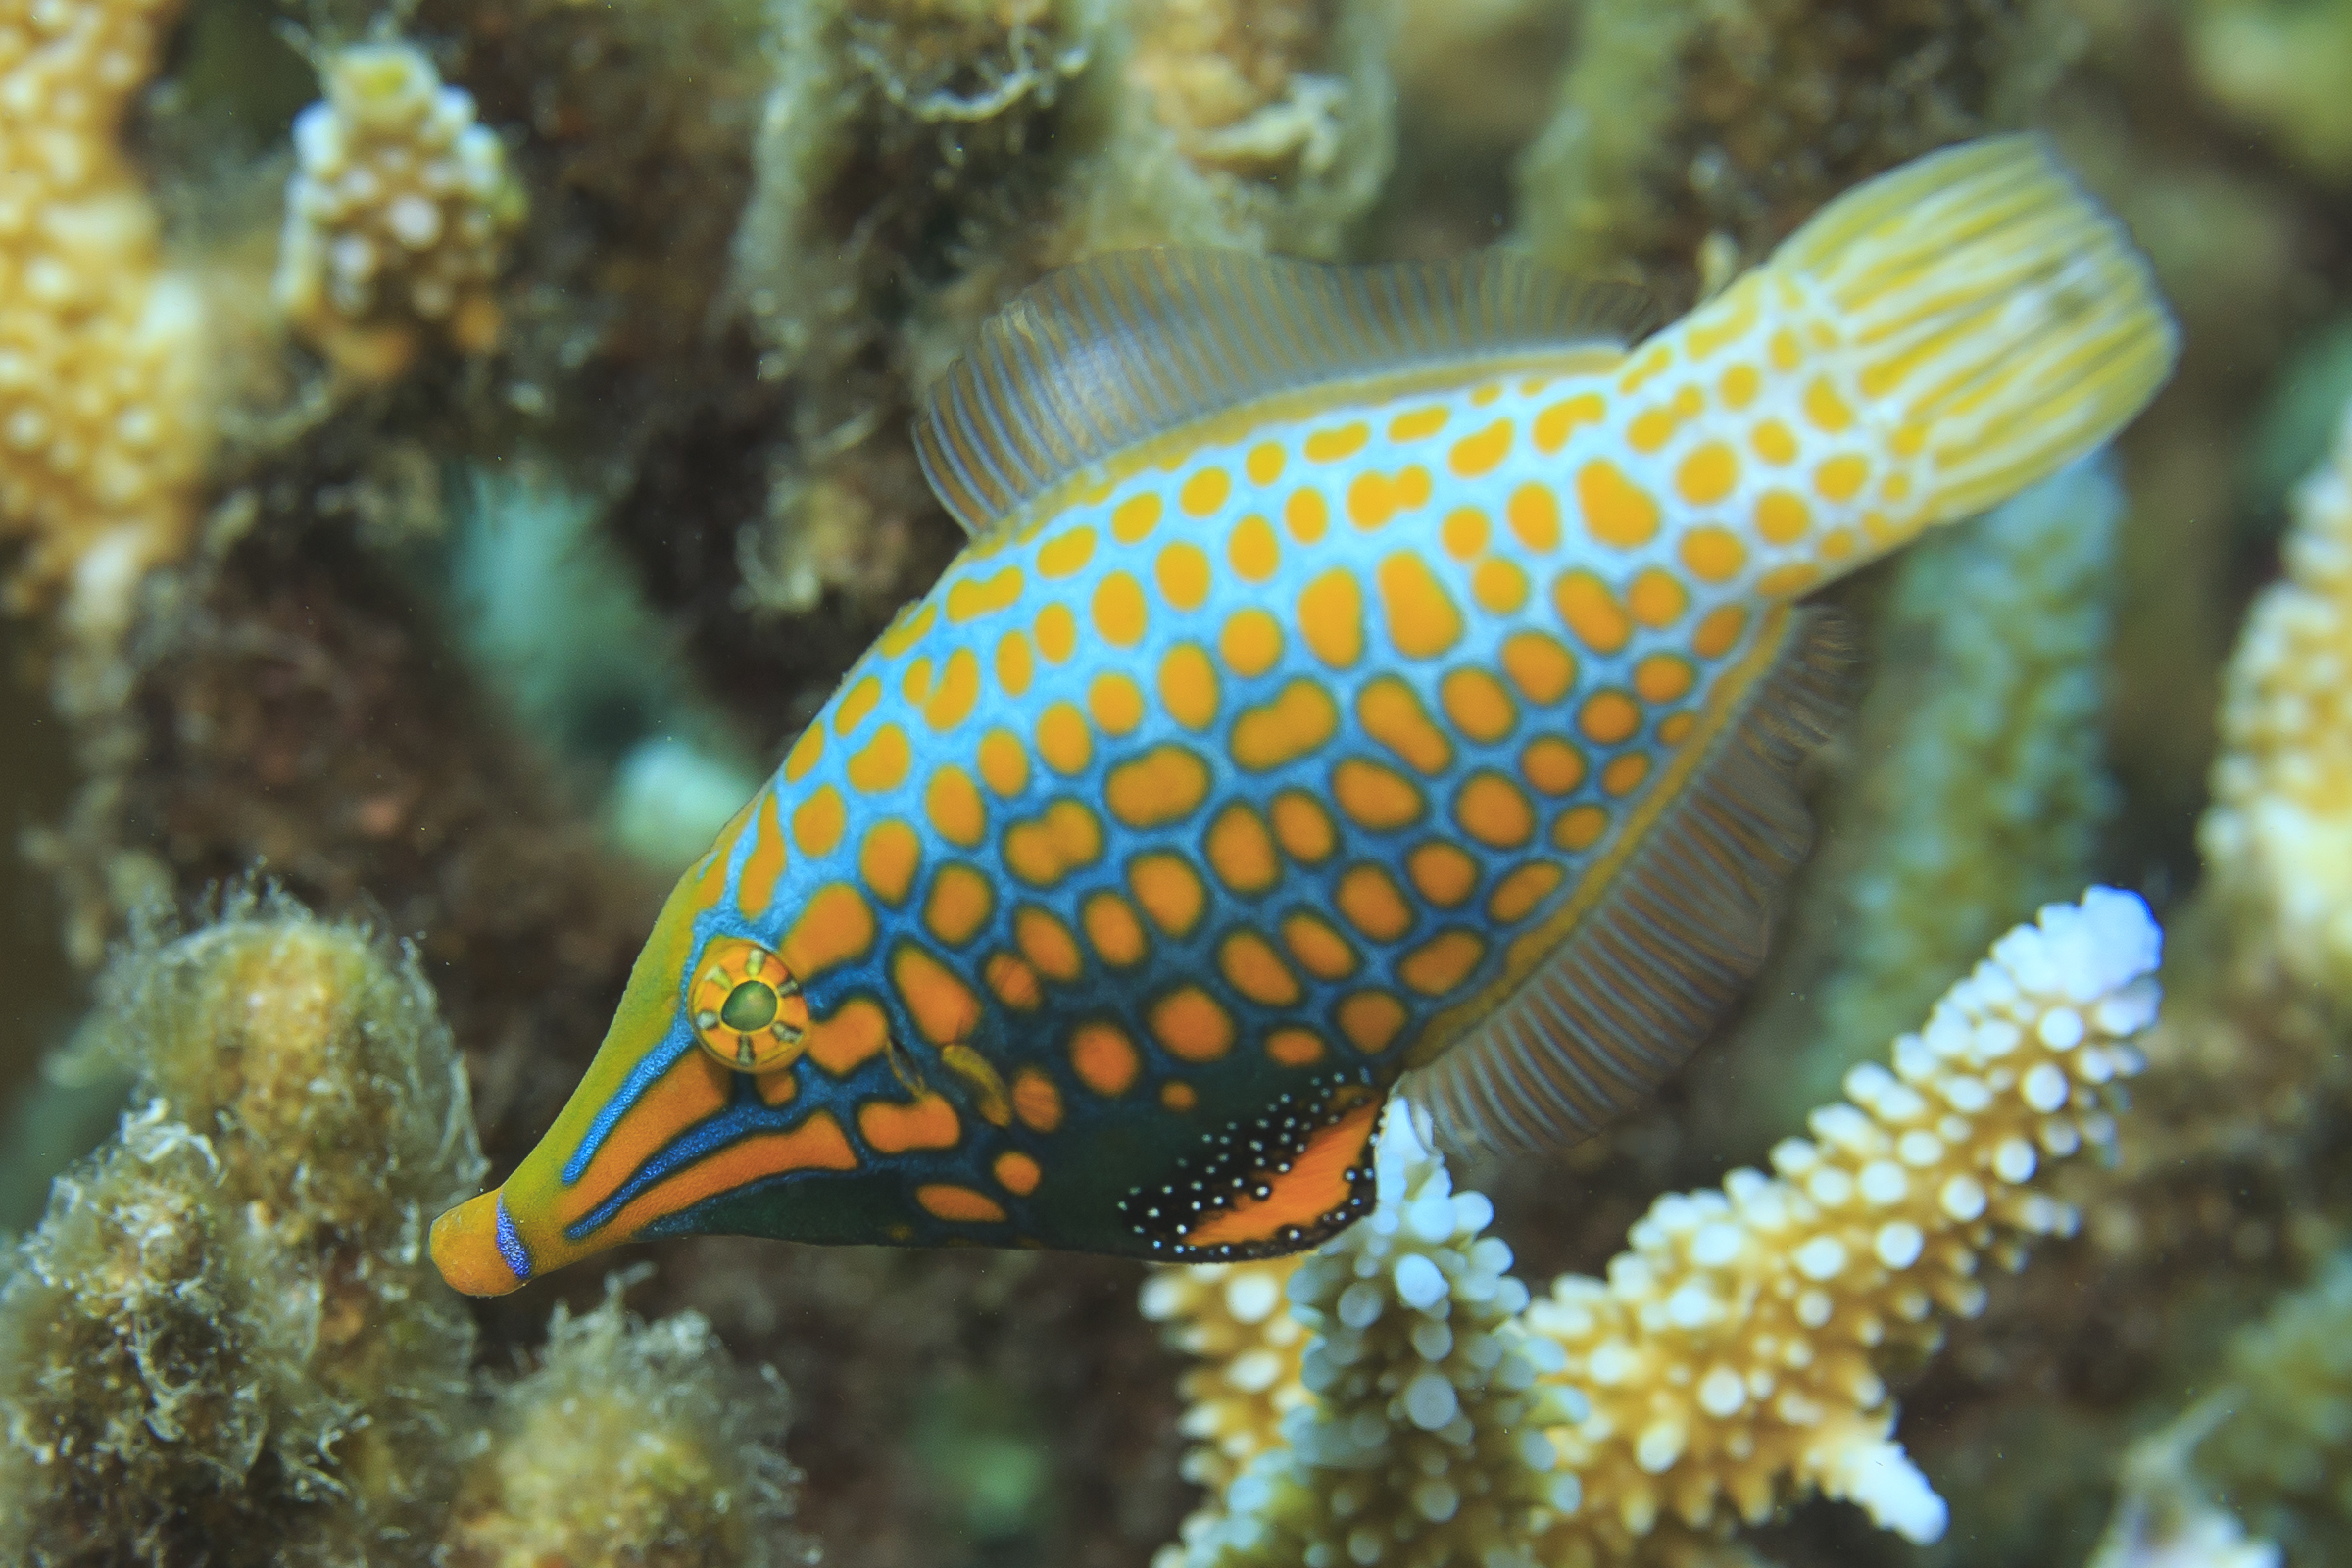 A filefish, pictured here, can create chemical camouflage by feeding on coral reefs. Credit: Tane Sinclair-Taylor